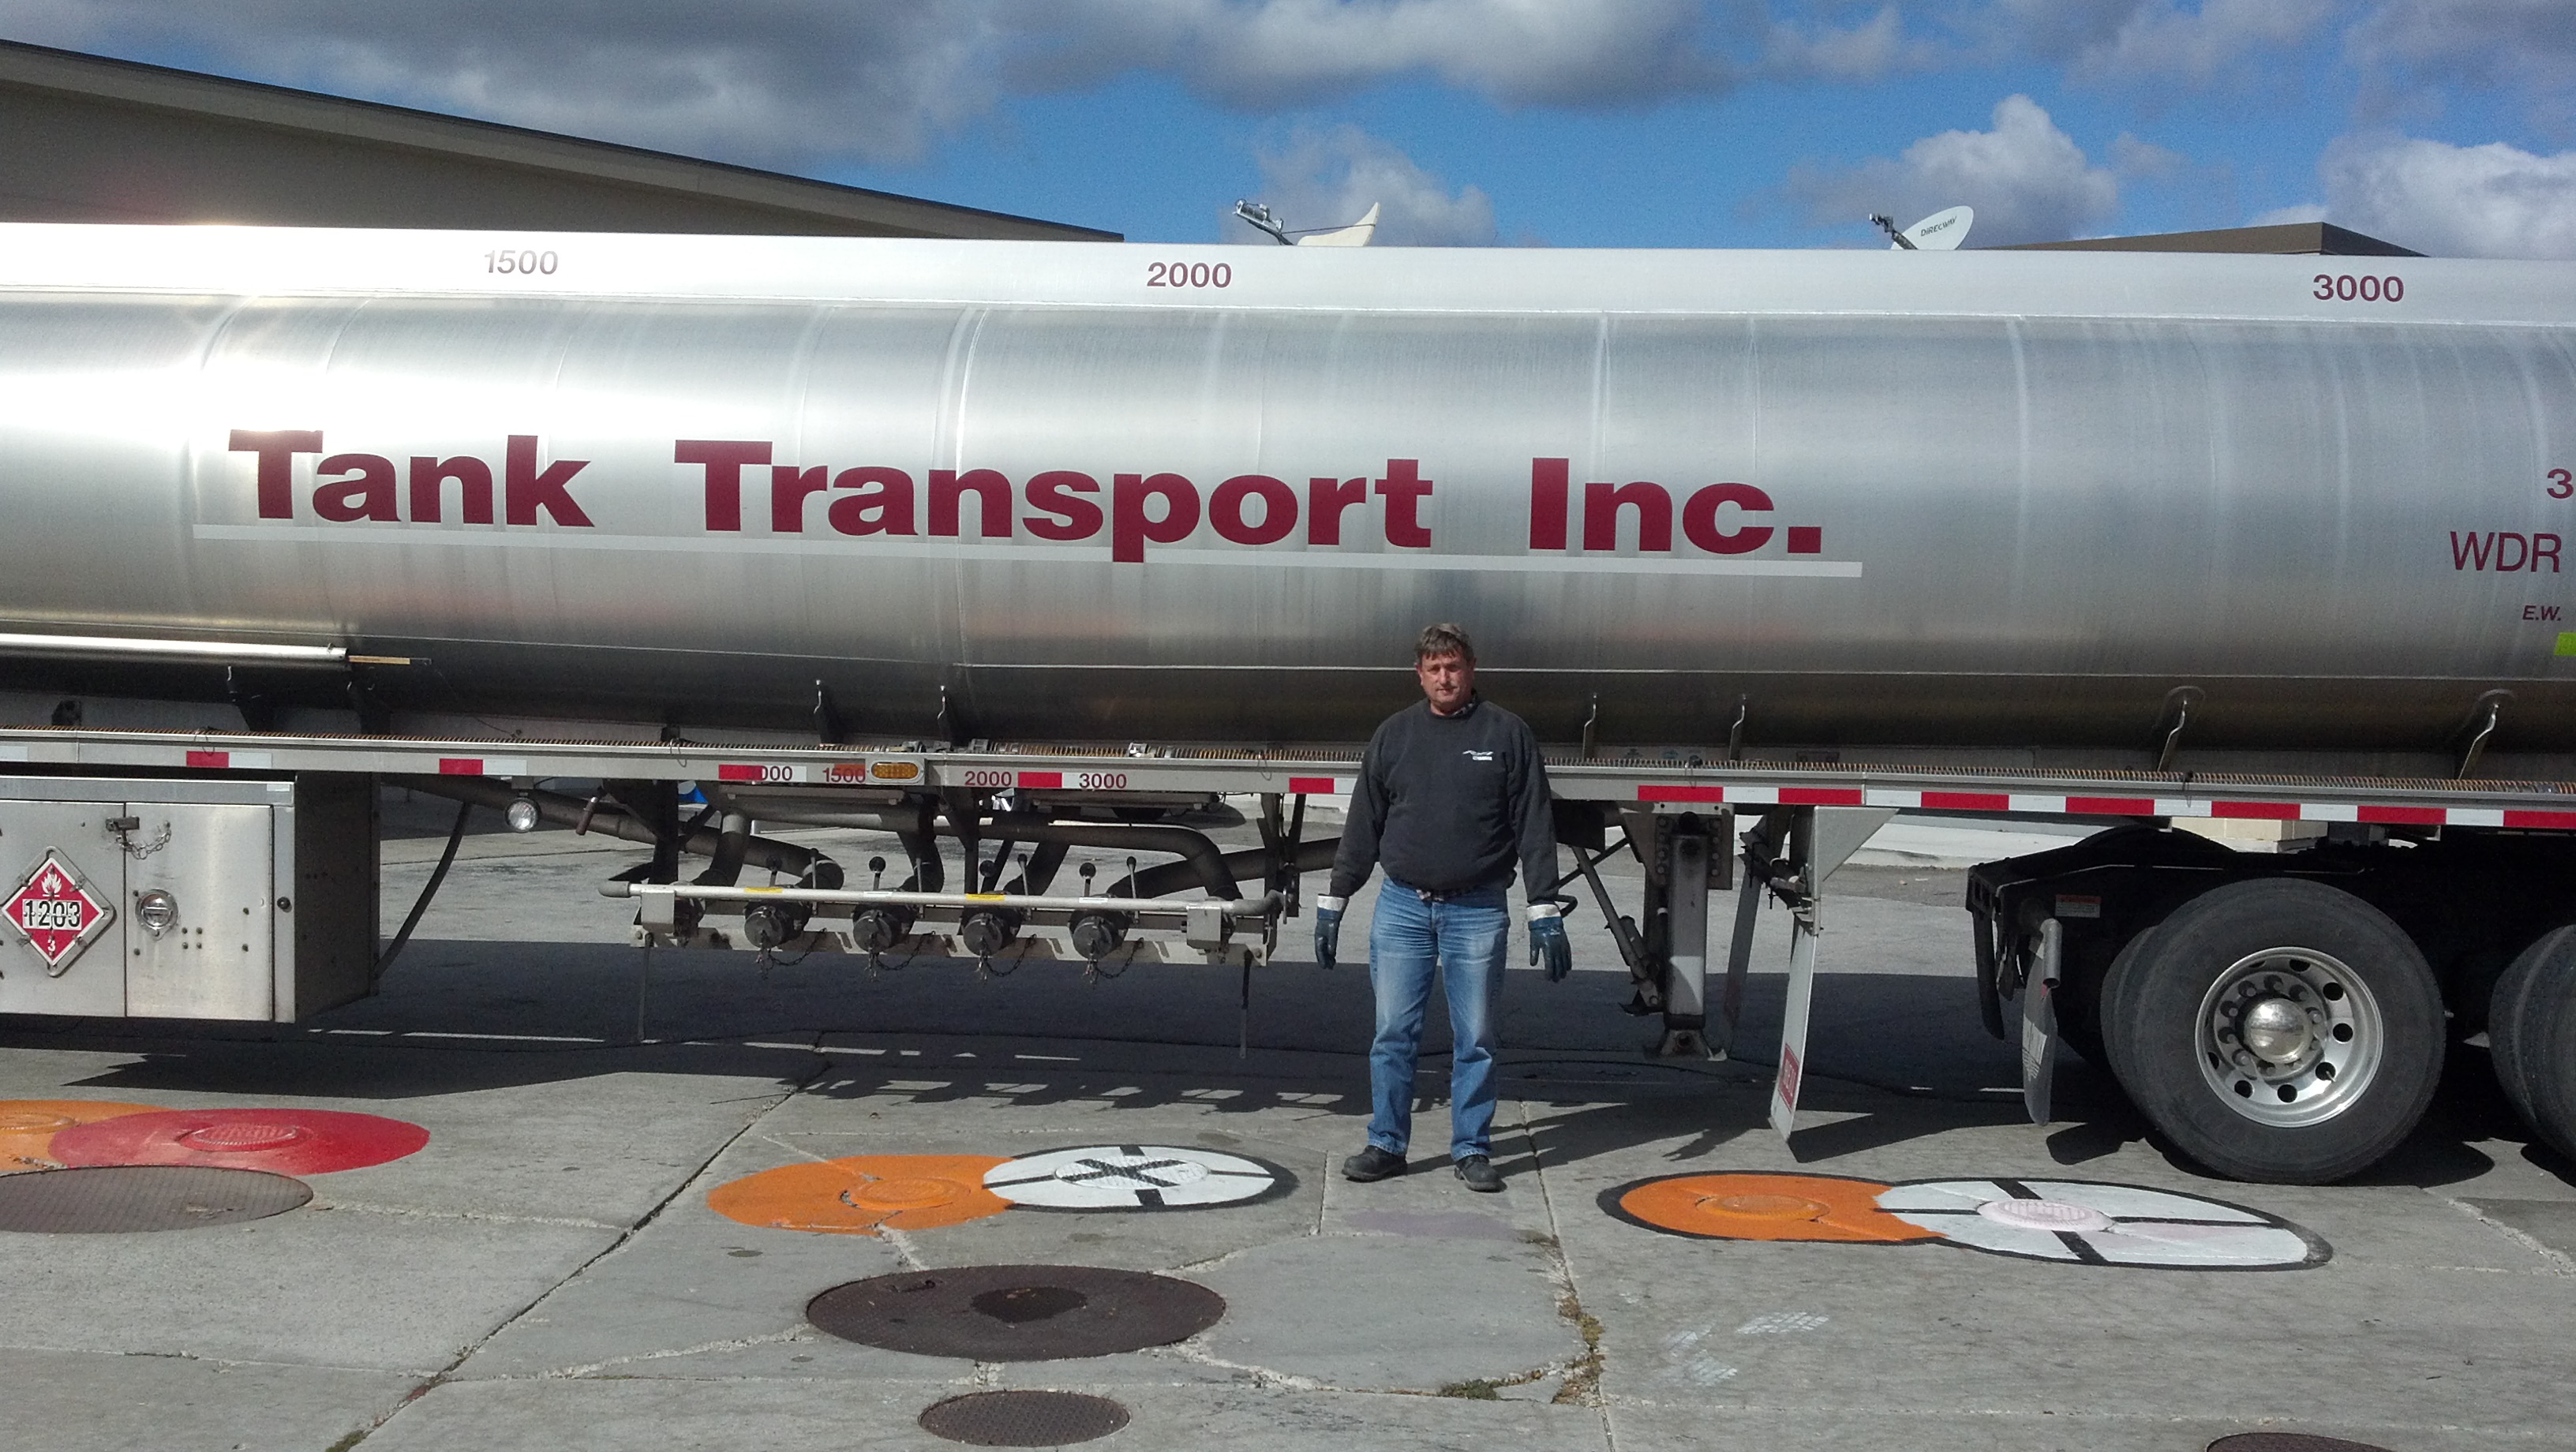 Dave Greve Tank Transport Teamster Member with 27 years in the tank business, soon to be fighting the elements delivering fuel we rely on in our daily life.